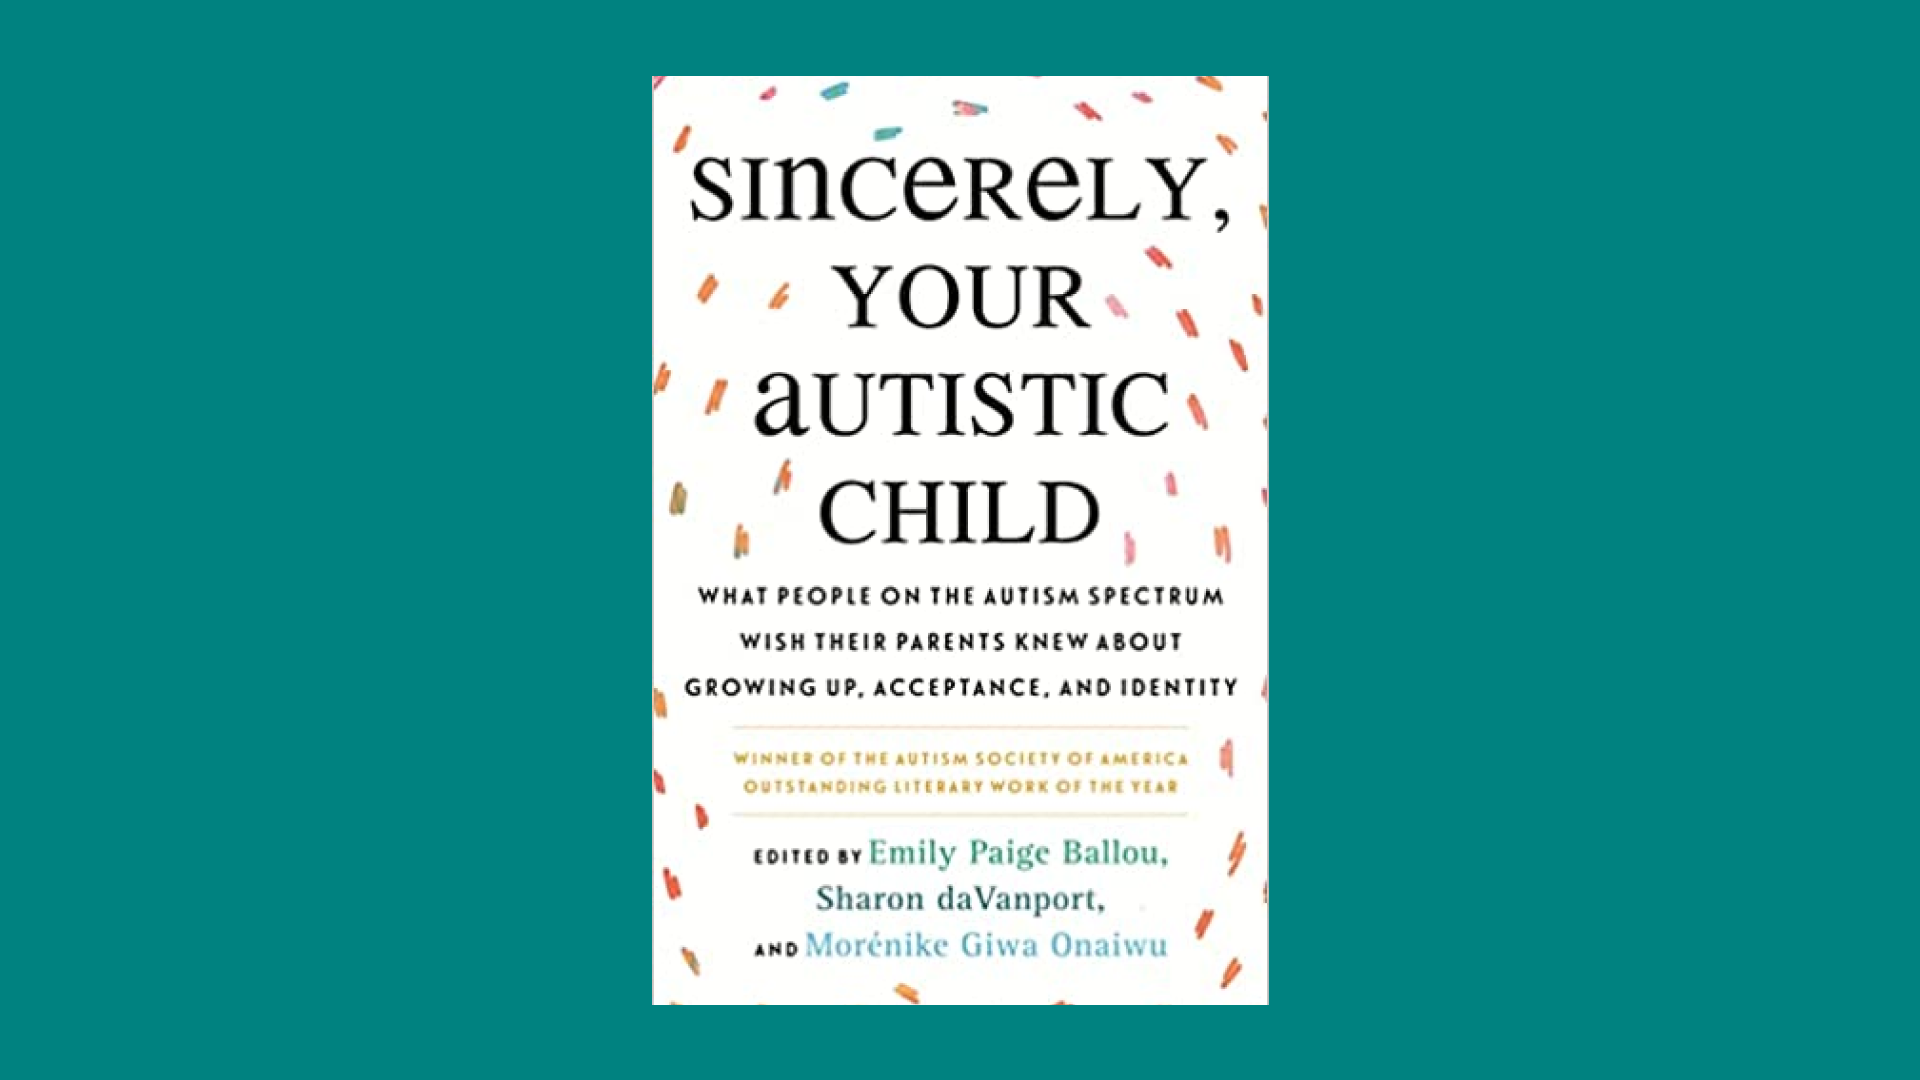 Cover of book "Sincerely, Your Autistic Child," which is white with colorful confetti